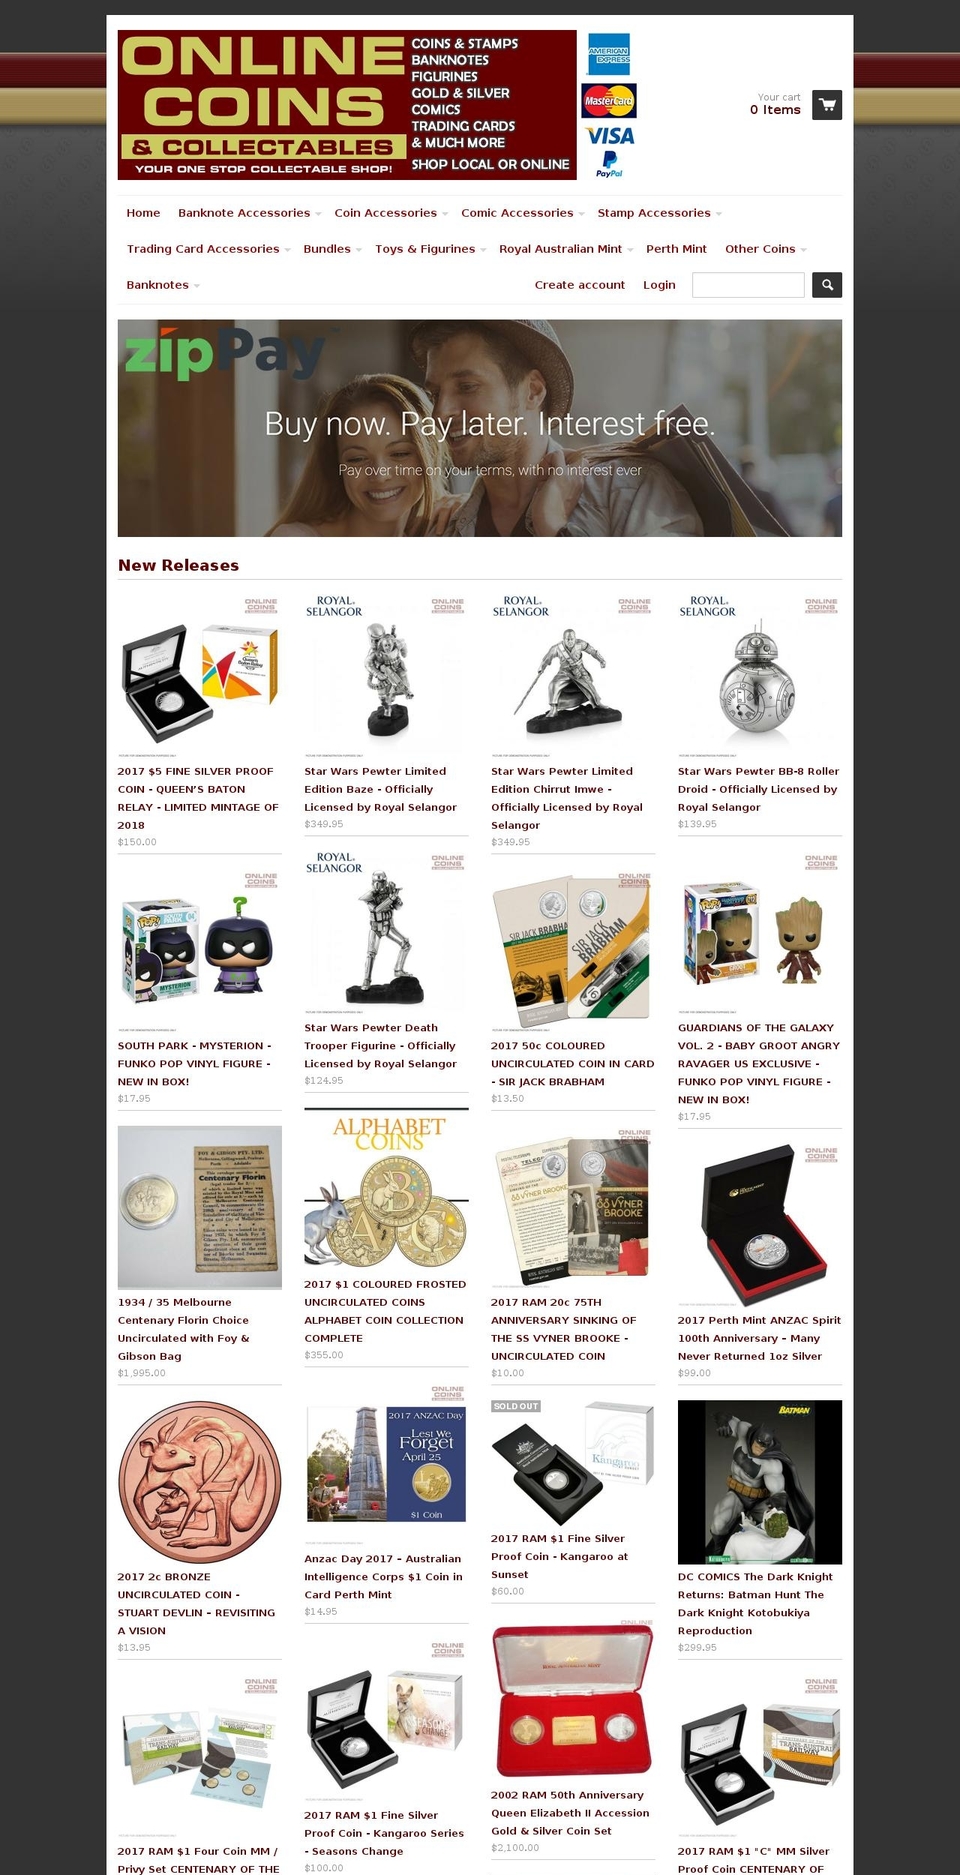 Masonry Shopify theme site example onlinecoinsandcollectables.com.au